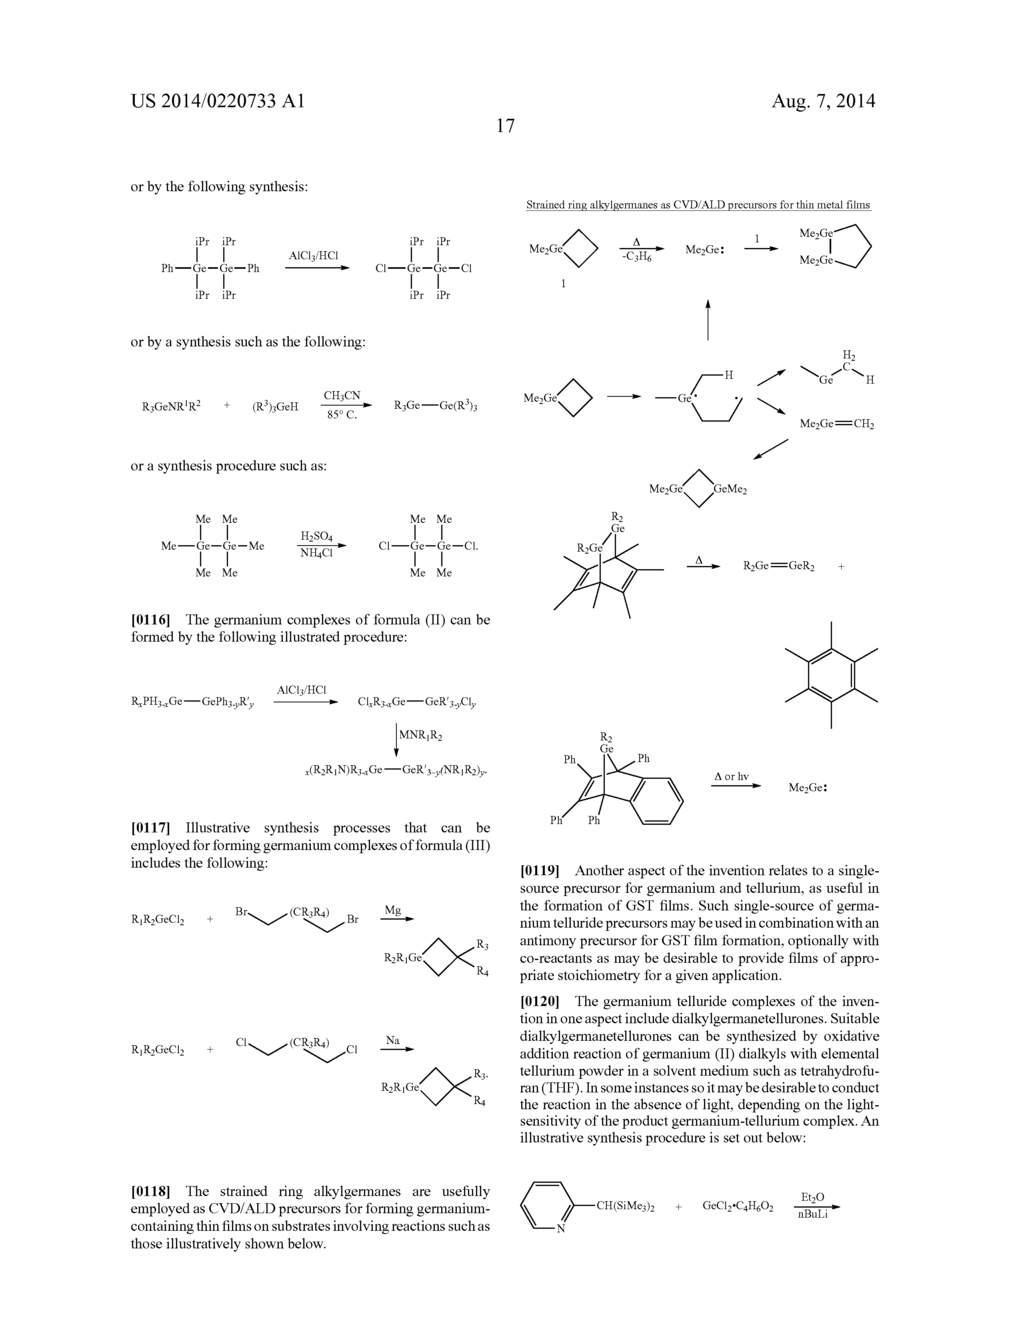 ANTIMONY AND GERMANIUM COMPLEXES USEFUL FOR CVD/ALD OF METAL THIN FILMS - diagram, schematic, and image 23